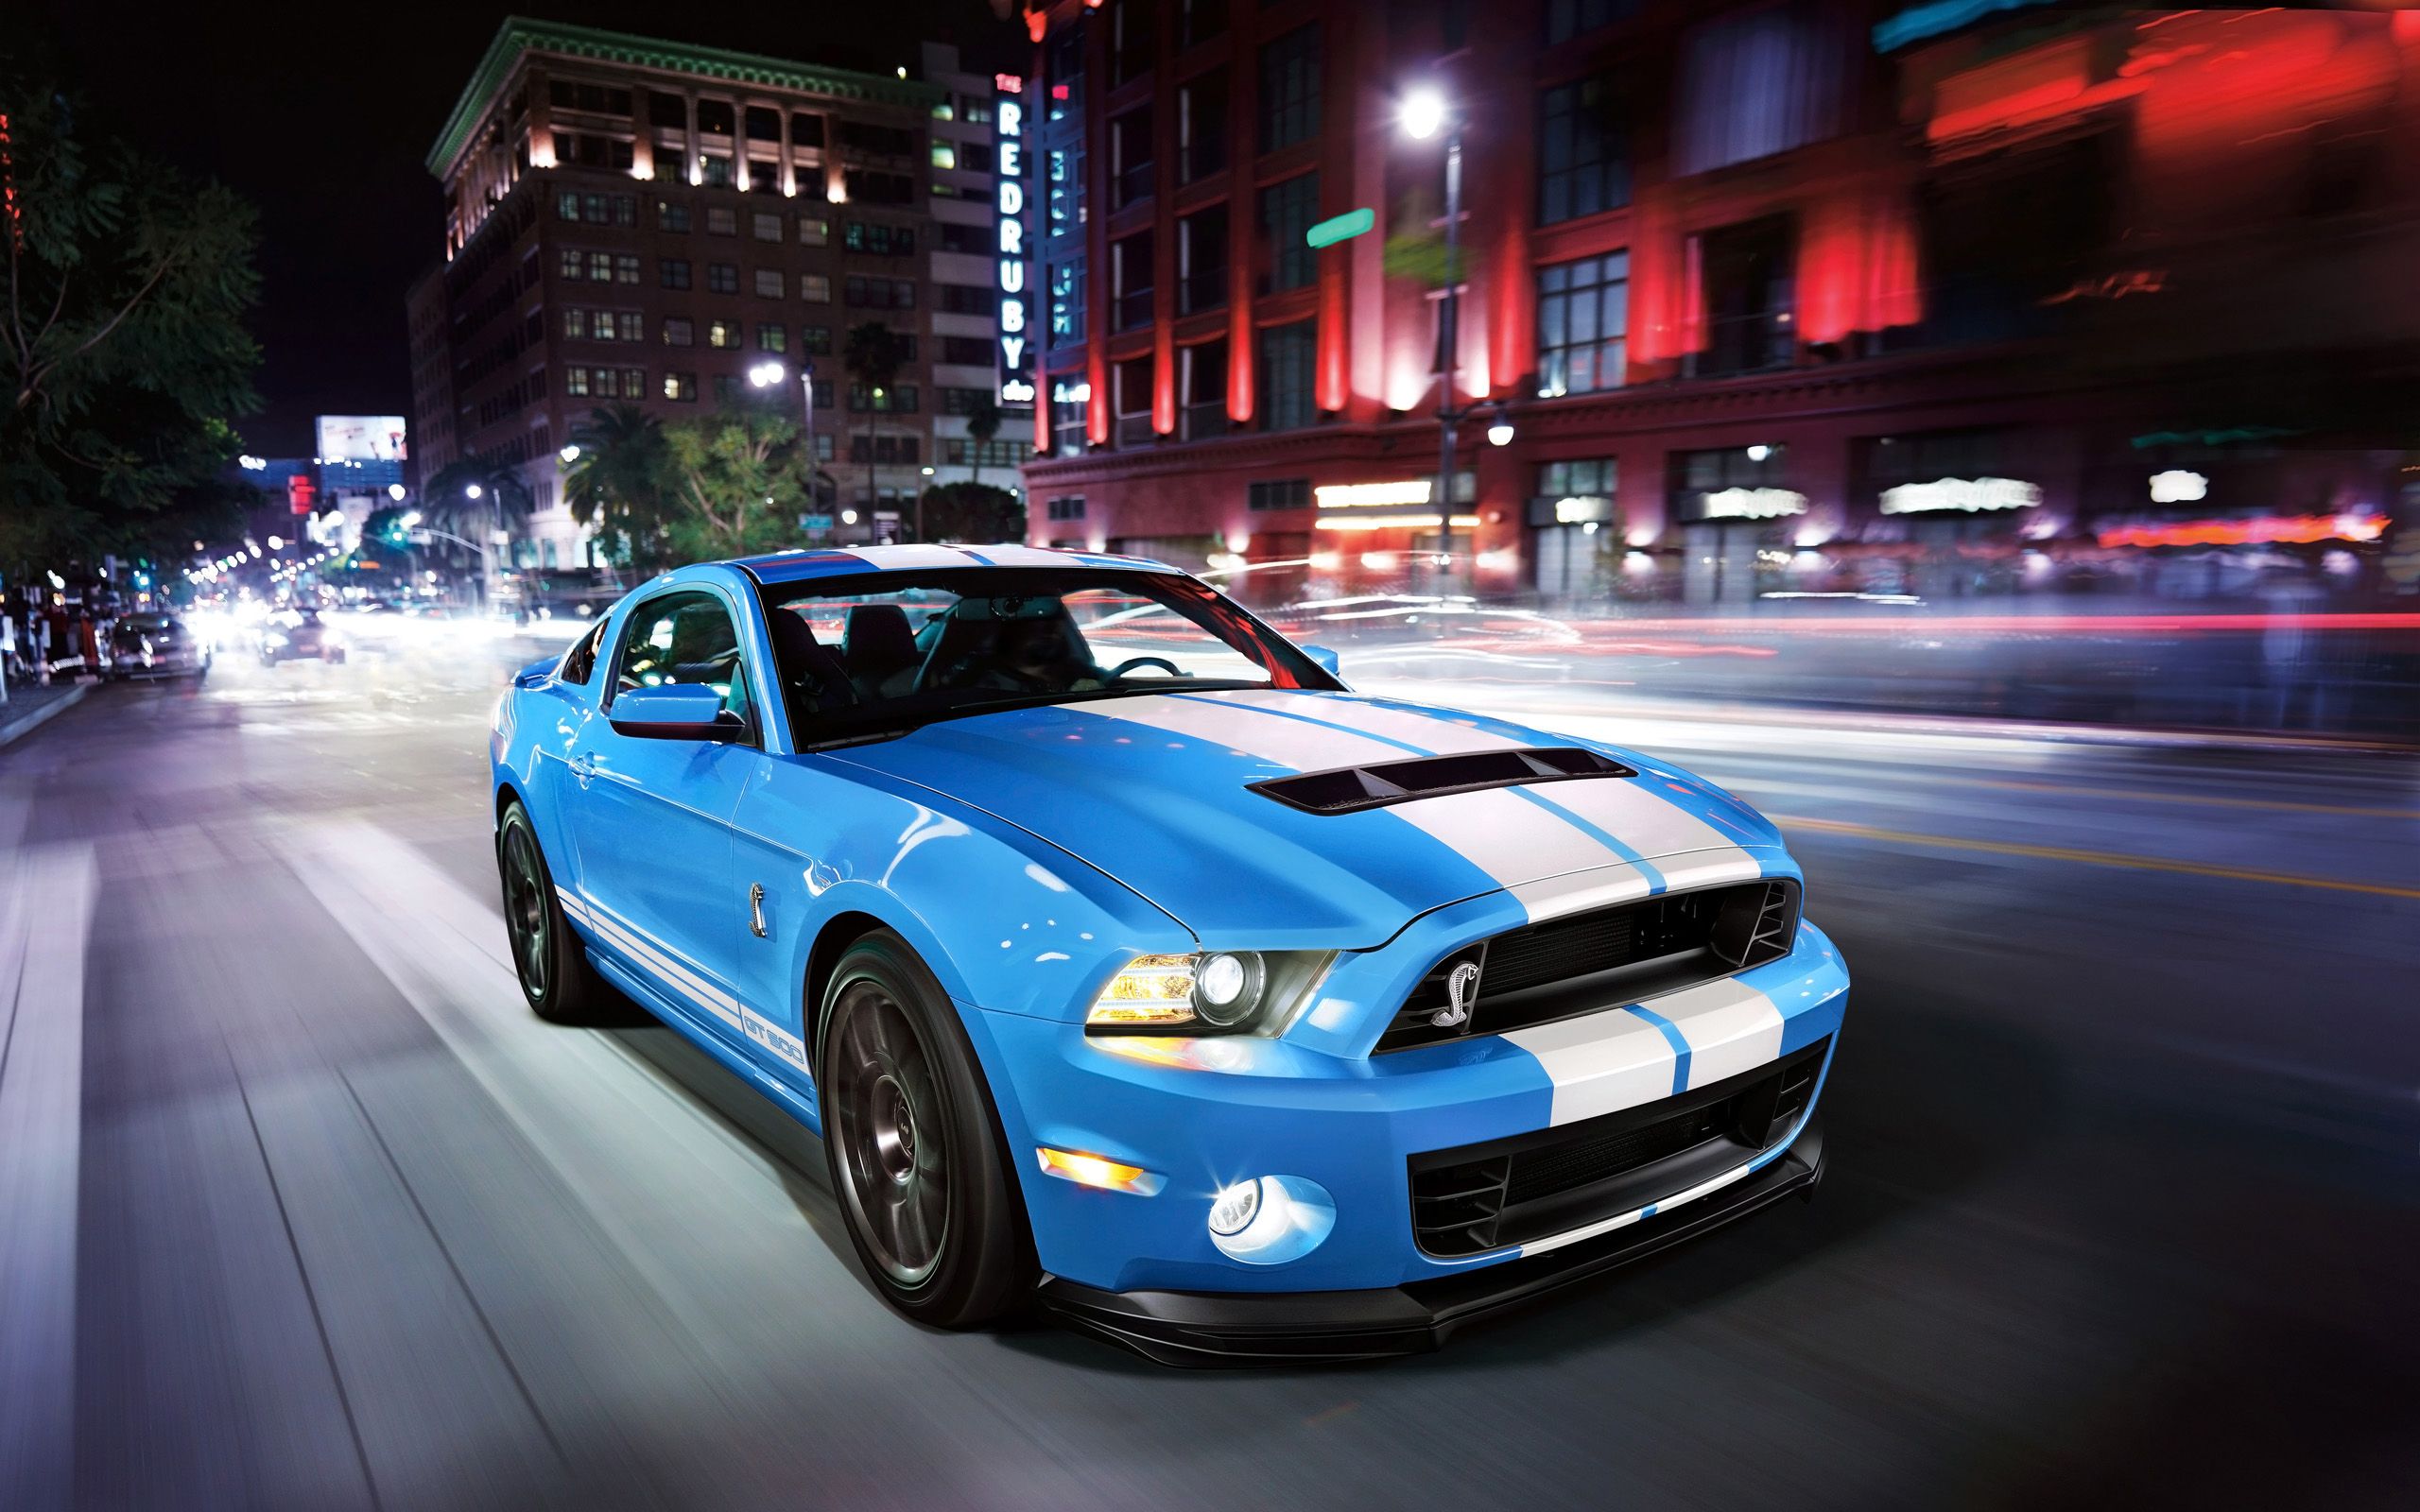 Ford Mustang Shelby Gt500 Hd Wallpapers Wallpaper Cave 6749